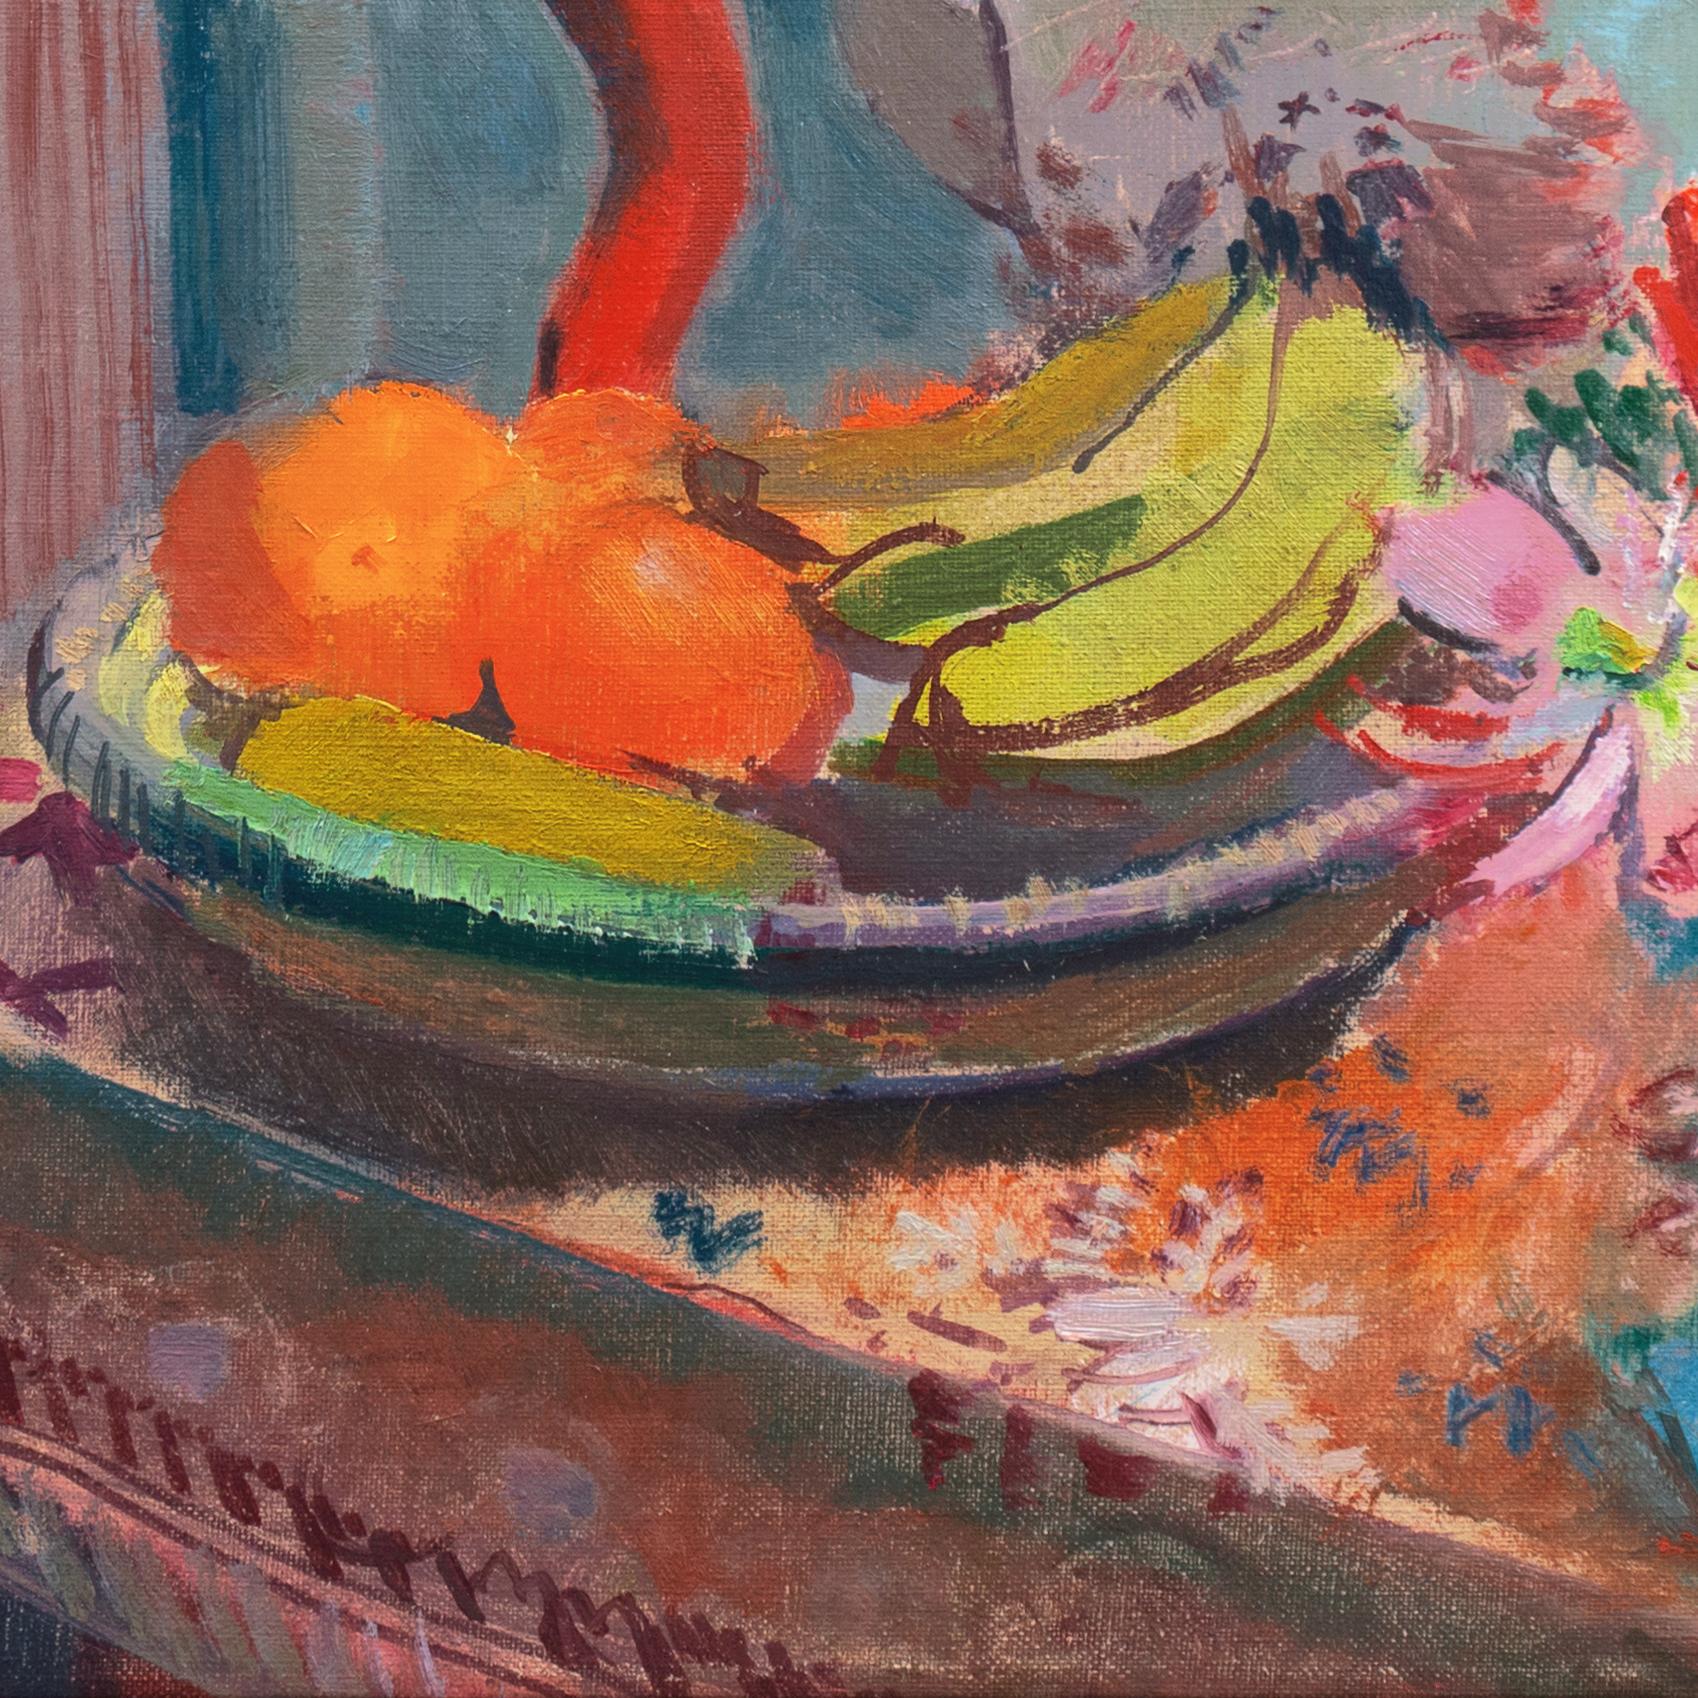 Signed upper left, 'V. Isbrand' for Victor Isbrand (Danish, 1897-1989) and painted circa 1945. 

A vibrant Post-Impressionist still-life showing a view of a farmhouse interior with a porcelain chocolate-pot together with fruit and flowers arranged